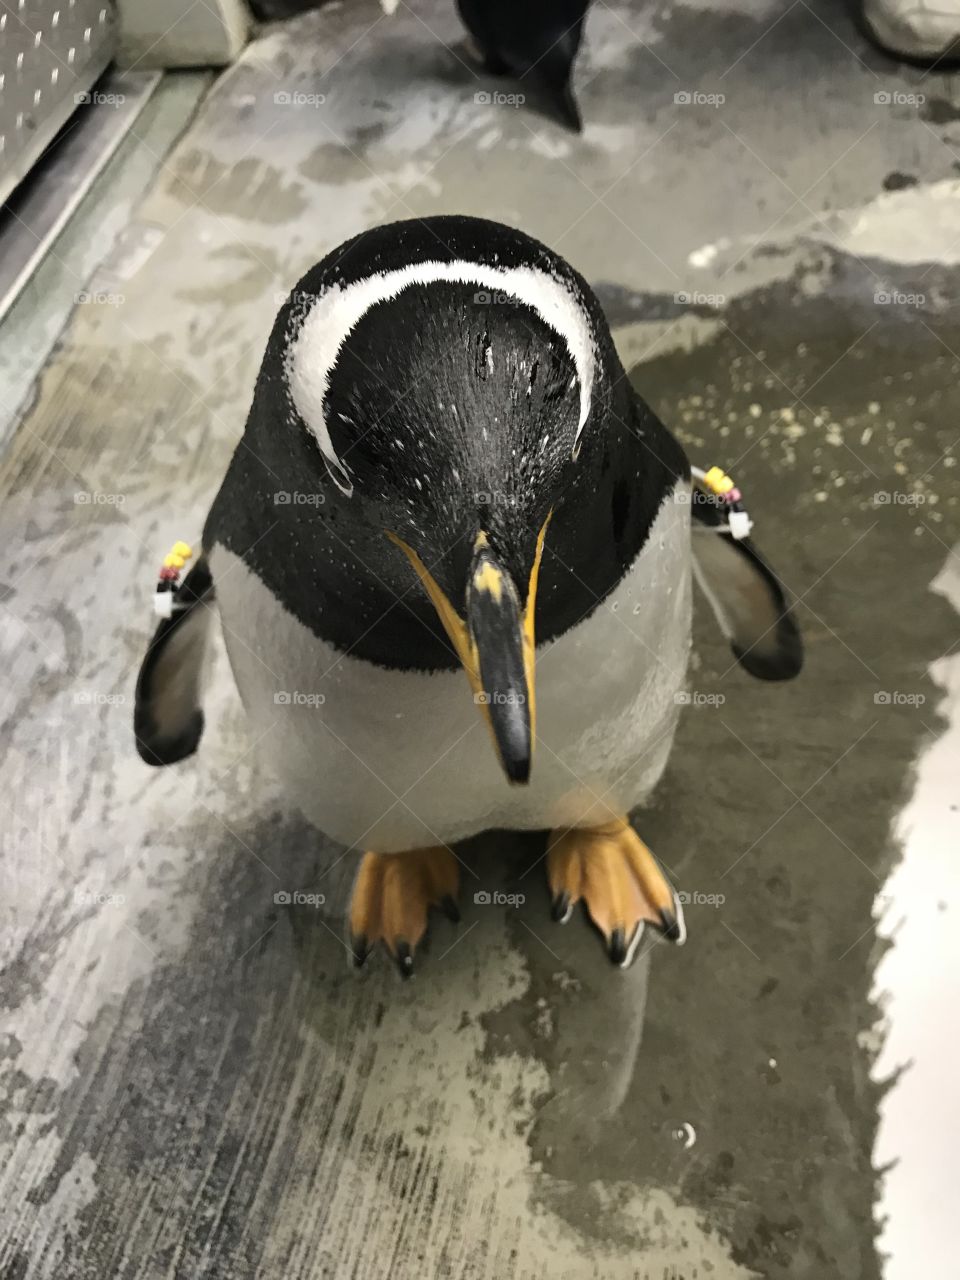 A penguin with a little bit of a foot fetish. 